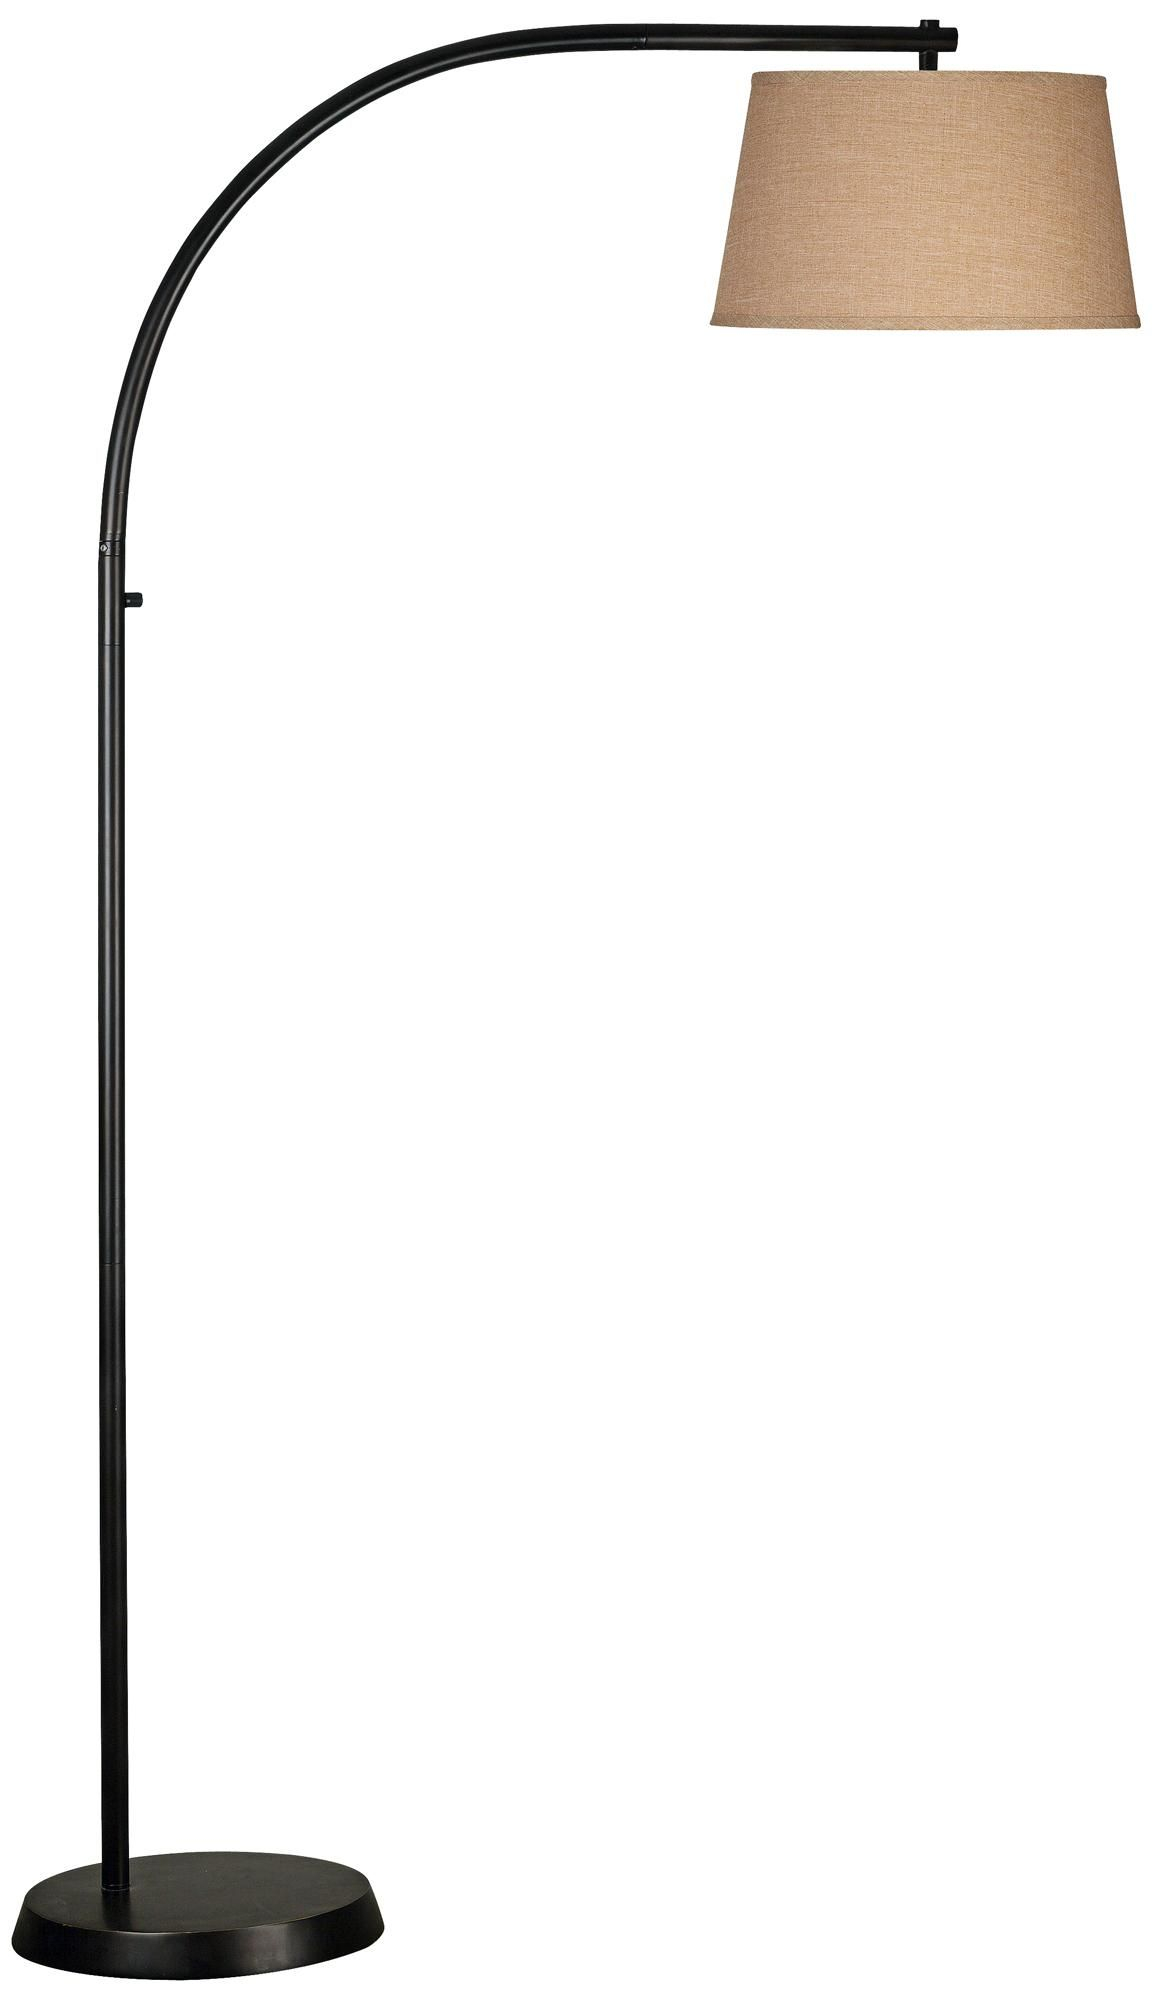 208 Kenroy Sweep Oil Rubbed Bronze Finish Arc Floor Lamp pertaining to proportions 1153 X 2000